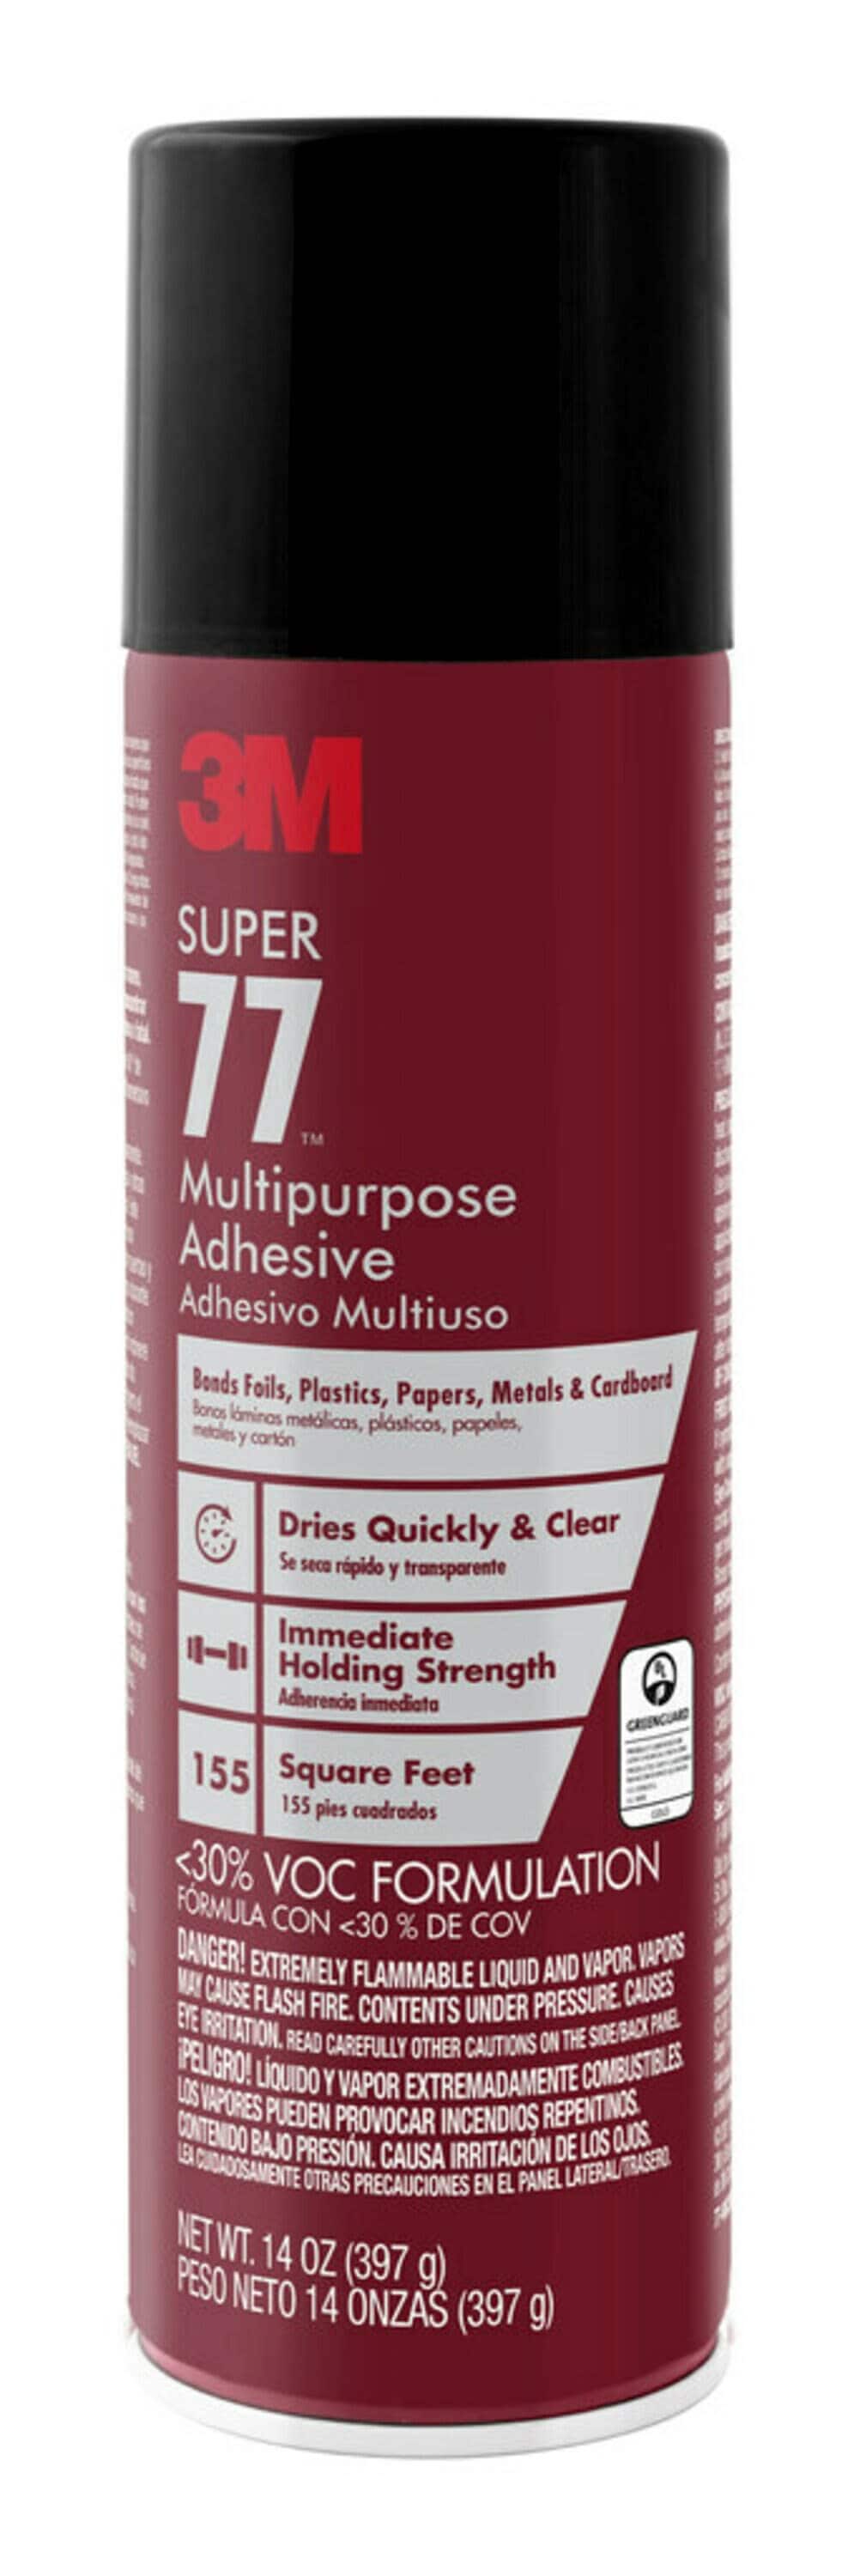 3M™ Super 77™ CA Multipurpose Spray Adhesive, Low VOC <25%, Clear, 24 fl oz  Can (Net Wt 18.0 oz) - The Binding Source